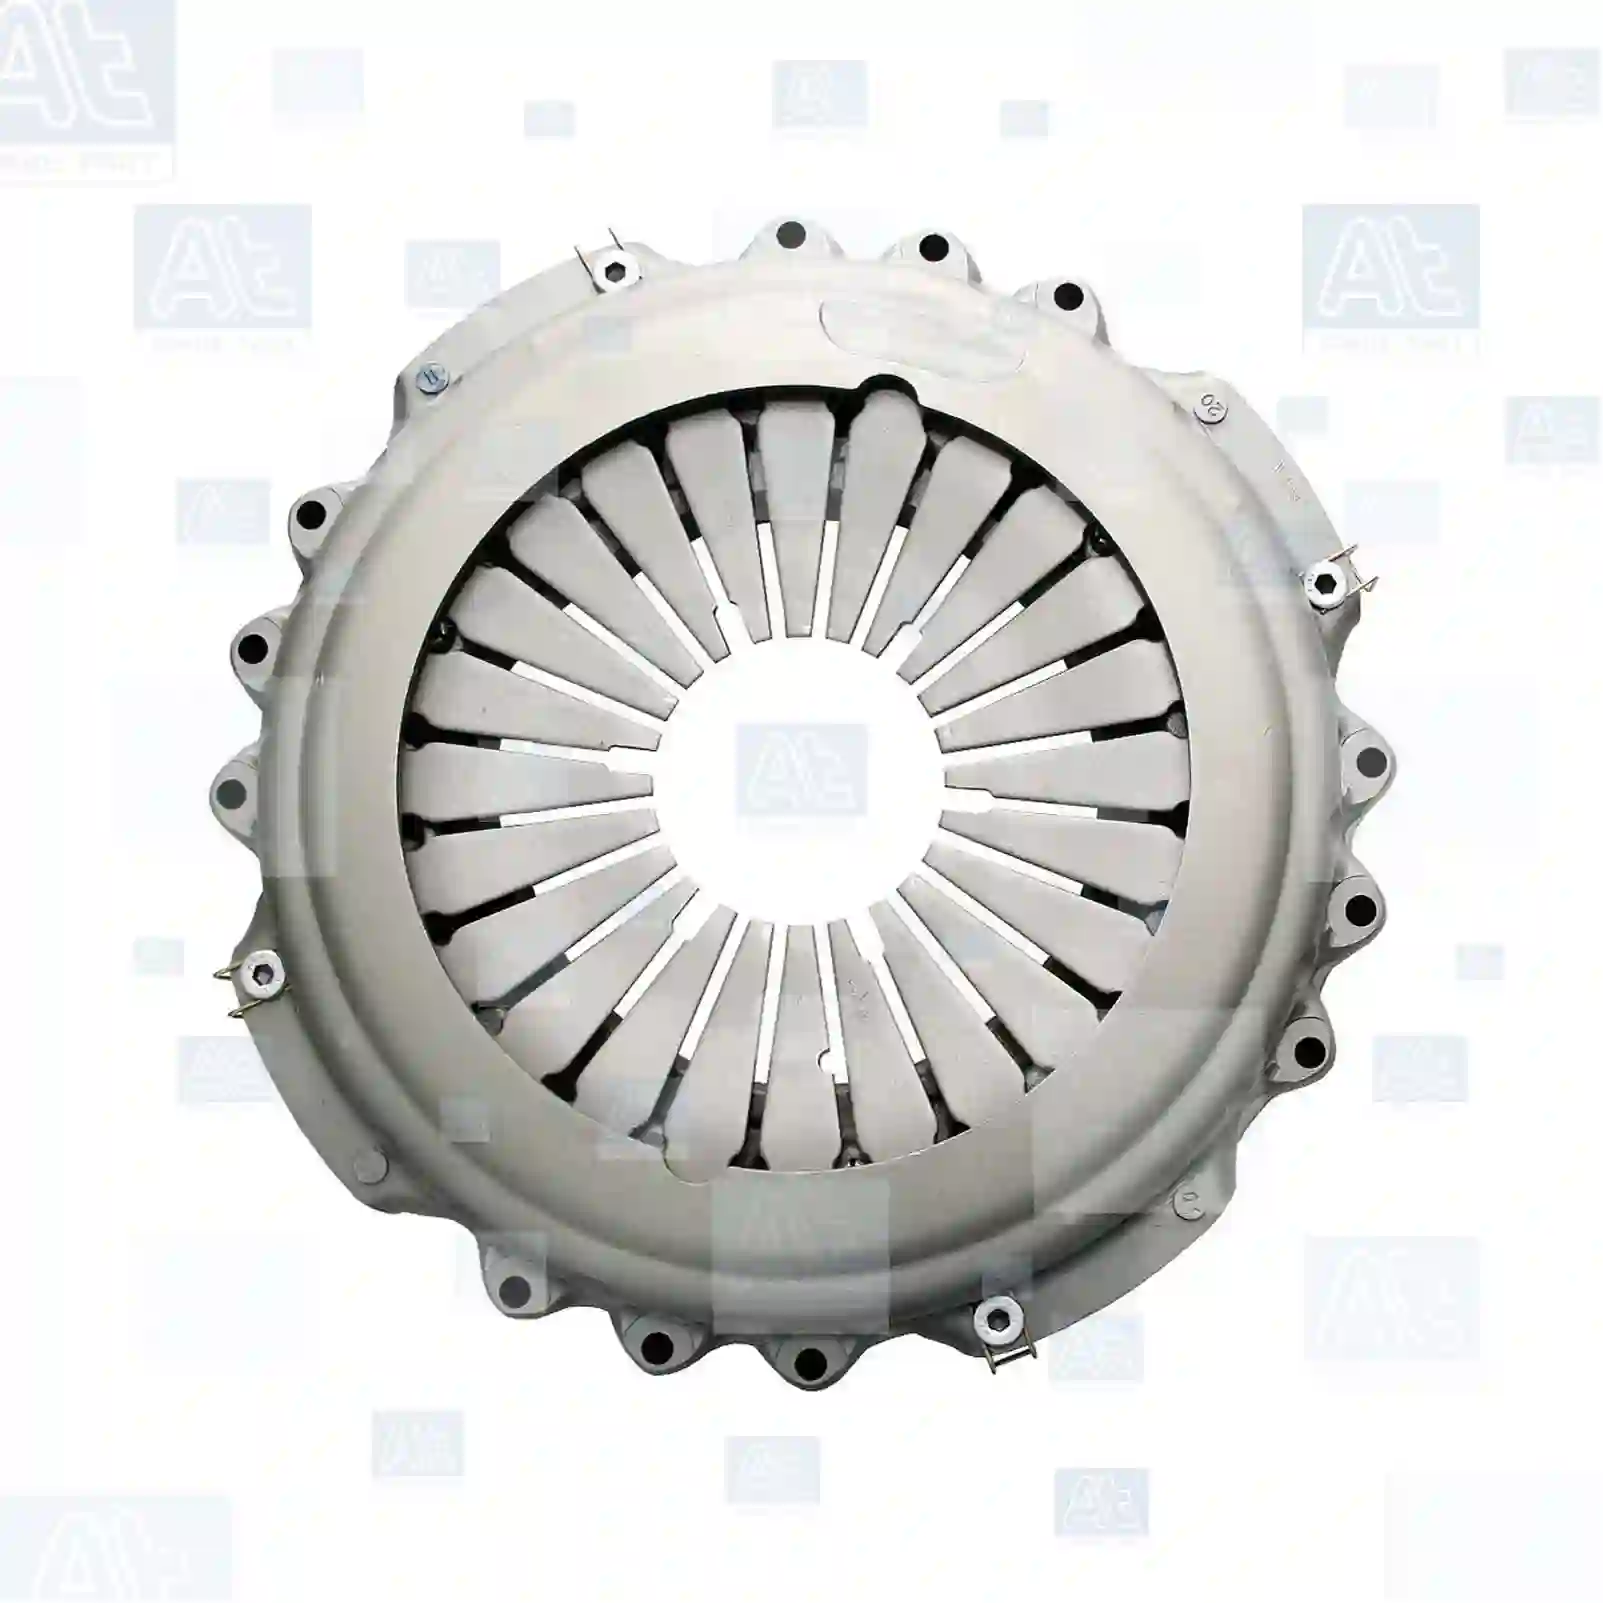 Clutch cover, 77722101, 1113870, 1321254, 1321259, 1361679, 1365486, 1370794, 382499, 382576, 571217, 571218, 571220, 571221, 571226, 571227, 10571217, 10571218, 10571220, 10571221, 10571227, 1113870, 1321254, 1321259, 1361679, 1365486, 1370793, 1370794, 1571217, 1571220, 1571227, 382499, 382576, 571217, 571218, 571220, 571221, 571226, 571227 ||  77722101 At Spare Part | Engine, Accelerator Pedal, Camshaft, Connecting Rod, Crankcase, Crankshaft, Cylinder Head, Engine Suspension Mountings, Exhaust Manifold, Exhaust Gas Recirculation, Filter Kits, Flywheel Housing, General Overhaul Kits, Engine, Intake Manifold, Oil Cleaner, Oil Cooler, Oil Filter, Oil Pump, Oil Sump, Piston & Liner, Sensor & Switch, Timing Case, Turbocharger, Cooling System, Belt Tensioner, Coolant Filter, Coolant Pipe, Corrosion Prevention Agent, Drive, Expansion Tank, Fan, Intercooler, Monitors & Gauges, Radiator, Thermostat, V-Belt / Timing belt, Water Pump, Fuel System, Electronical Injector Unit, Feed Pump, Fuel Filter, cpl., Fuel Gauge Sender,  Fuel Line, Fuel Pump, Fuel Tank, Injection Line Kit, Injection Pump, Exhaust System, Clutch & Pedal, Gearbox, Propeller Shaft, Axles, Brake System, Hubs & Wheels, Suspension, Leaf Spring, Universal Parts / Accessories, Steering, Electrical System, Cabin Clutch cover, 77722101, 1113870, 1321254, 1321259, 1361679, 1365486, 1370794, 382499, 382576, 571217, 571218, 571220, 571221, 571226, 571227, 10571217, 10571218, 10571220, 10571221, 10571227, 1113870, 1321254, 1321259, 1361679, 1365486, 1370793, 1370794, 1571217, 1571220, 1571227, 382499, 382576, 571217, 571218, 571220, 571221, 571226, 571227 ||  77722101 At Spare Part | Engine, Accelerator Pedal, Camshaft, Connecting Rod, Crankcase, Crankshaft, Cylinder Head, Engine Suspension Mountings, Exhaust Manifold, Exhaust Gas Recirculation, Filter Kits, Flywheel Housing, General Overhaul Kits, Engine, Intake Manifold, Oil Cleaner, Oil Cooler, Oil Filter, Oil Pump, Oil Sump, Piston & Liner, Sensor & Switch, Timing Case, Turbocharger, Cooling System, Belt Tensioner, Coolant Filter, Coolant Pipe, Corrosion Prevention Agent, Drive, Expansion Tank, Fan, Intercooler, Monitors & Gauges, Radiator, Thermostat, V-Belt / Timing belt, Water Pump, Fuel System, Electronical Injector Unit, Feed Pump, Fuel Filter, cpl., Fuel Gauge Sender,  Fuel Line, Fuel Pump, Fuel Tank, Injection Line Kit, Injection Pump, Exhaust System, Clutch & Pedal, Gearbox, Propeller Shaft, Axles, Brake System, Hubs & Wheels, Suspension, Leaf Spring, Universal Parts / Accessories, Steering, Electrical System, Cabin